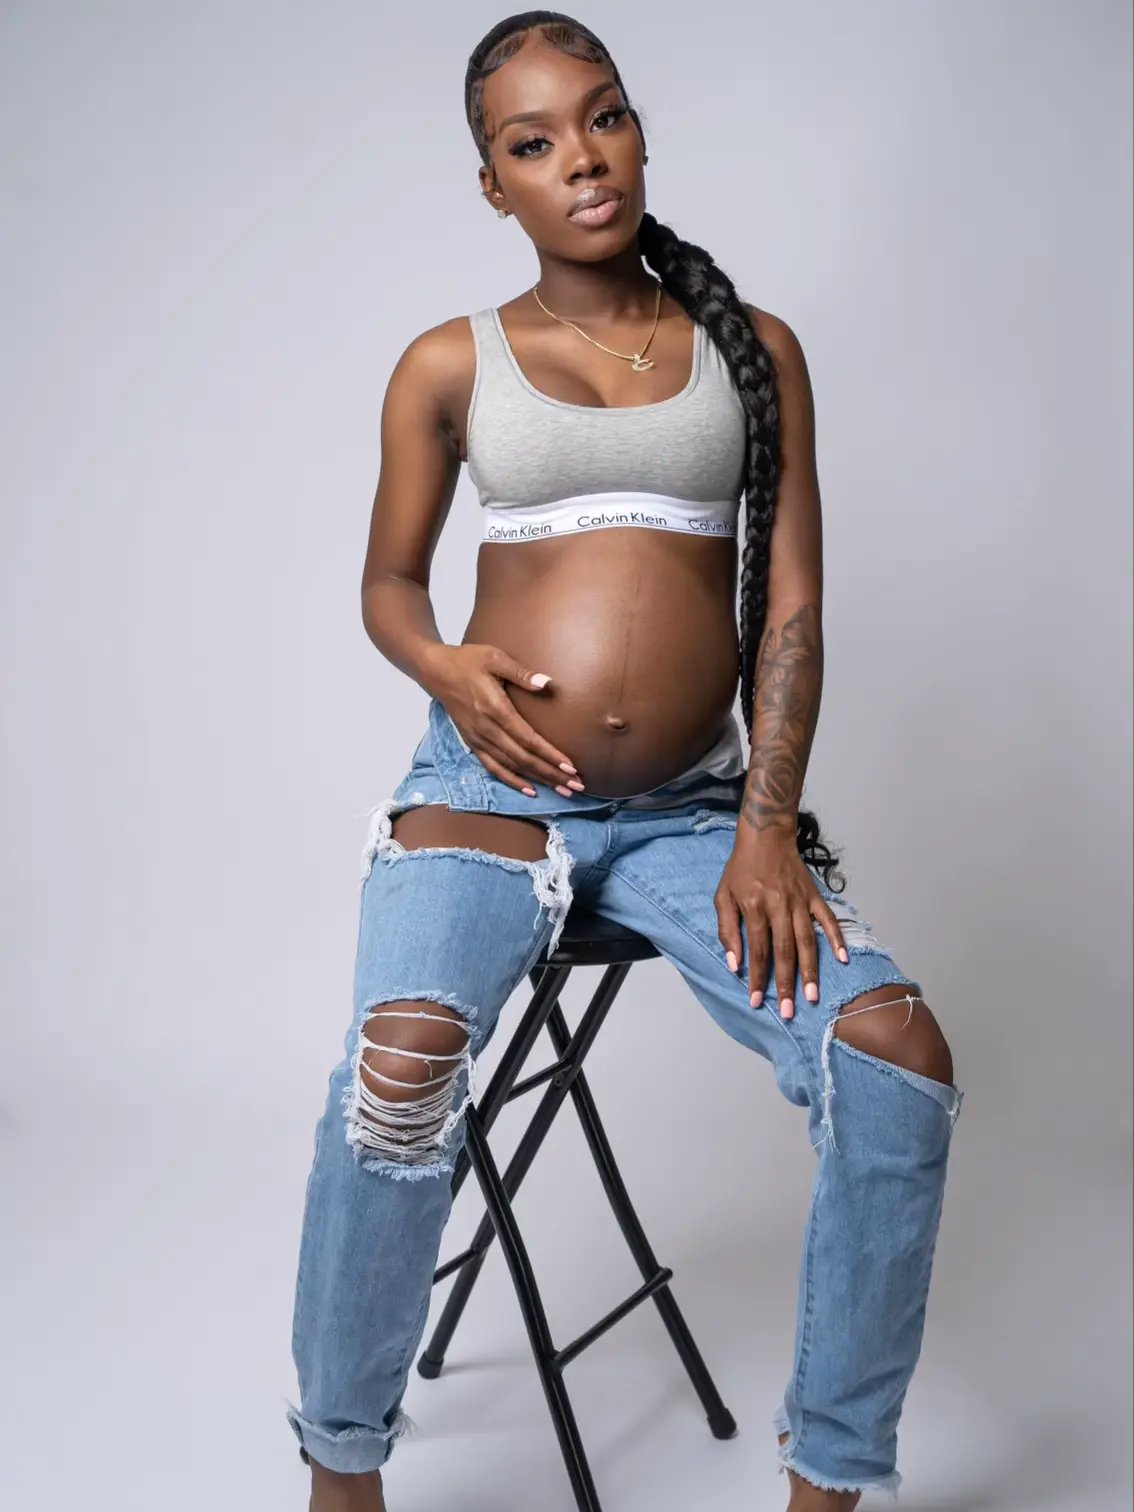 Maternity Shoot Ideas 🤍, Gallery posted by Chasitty Watson